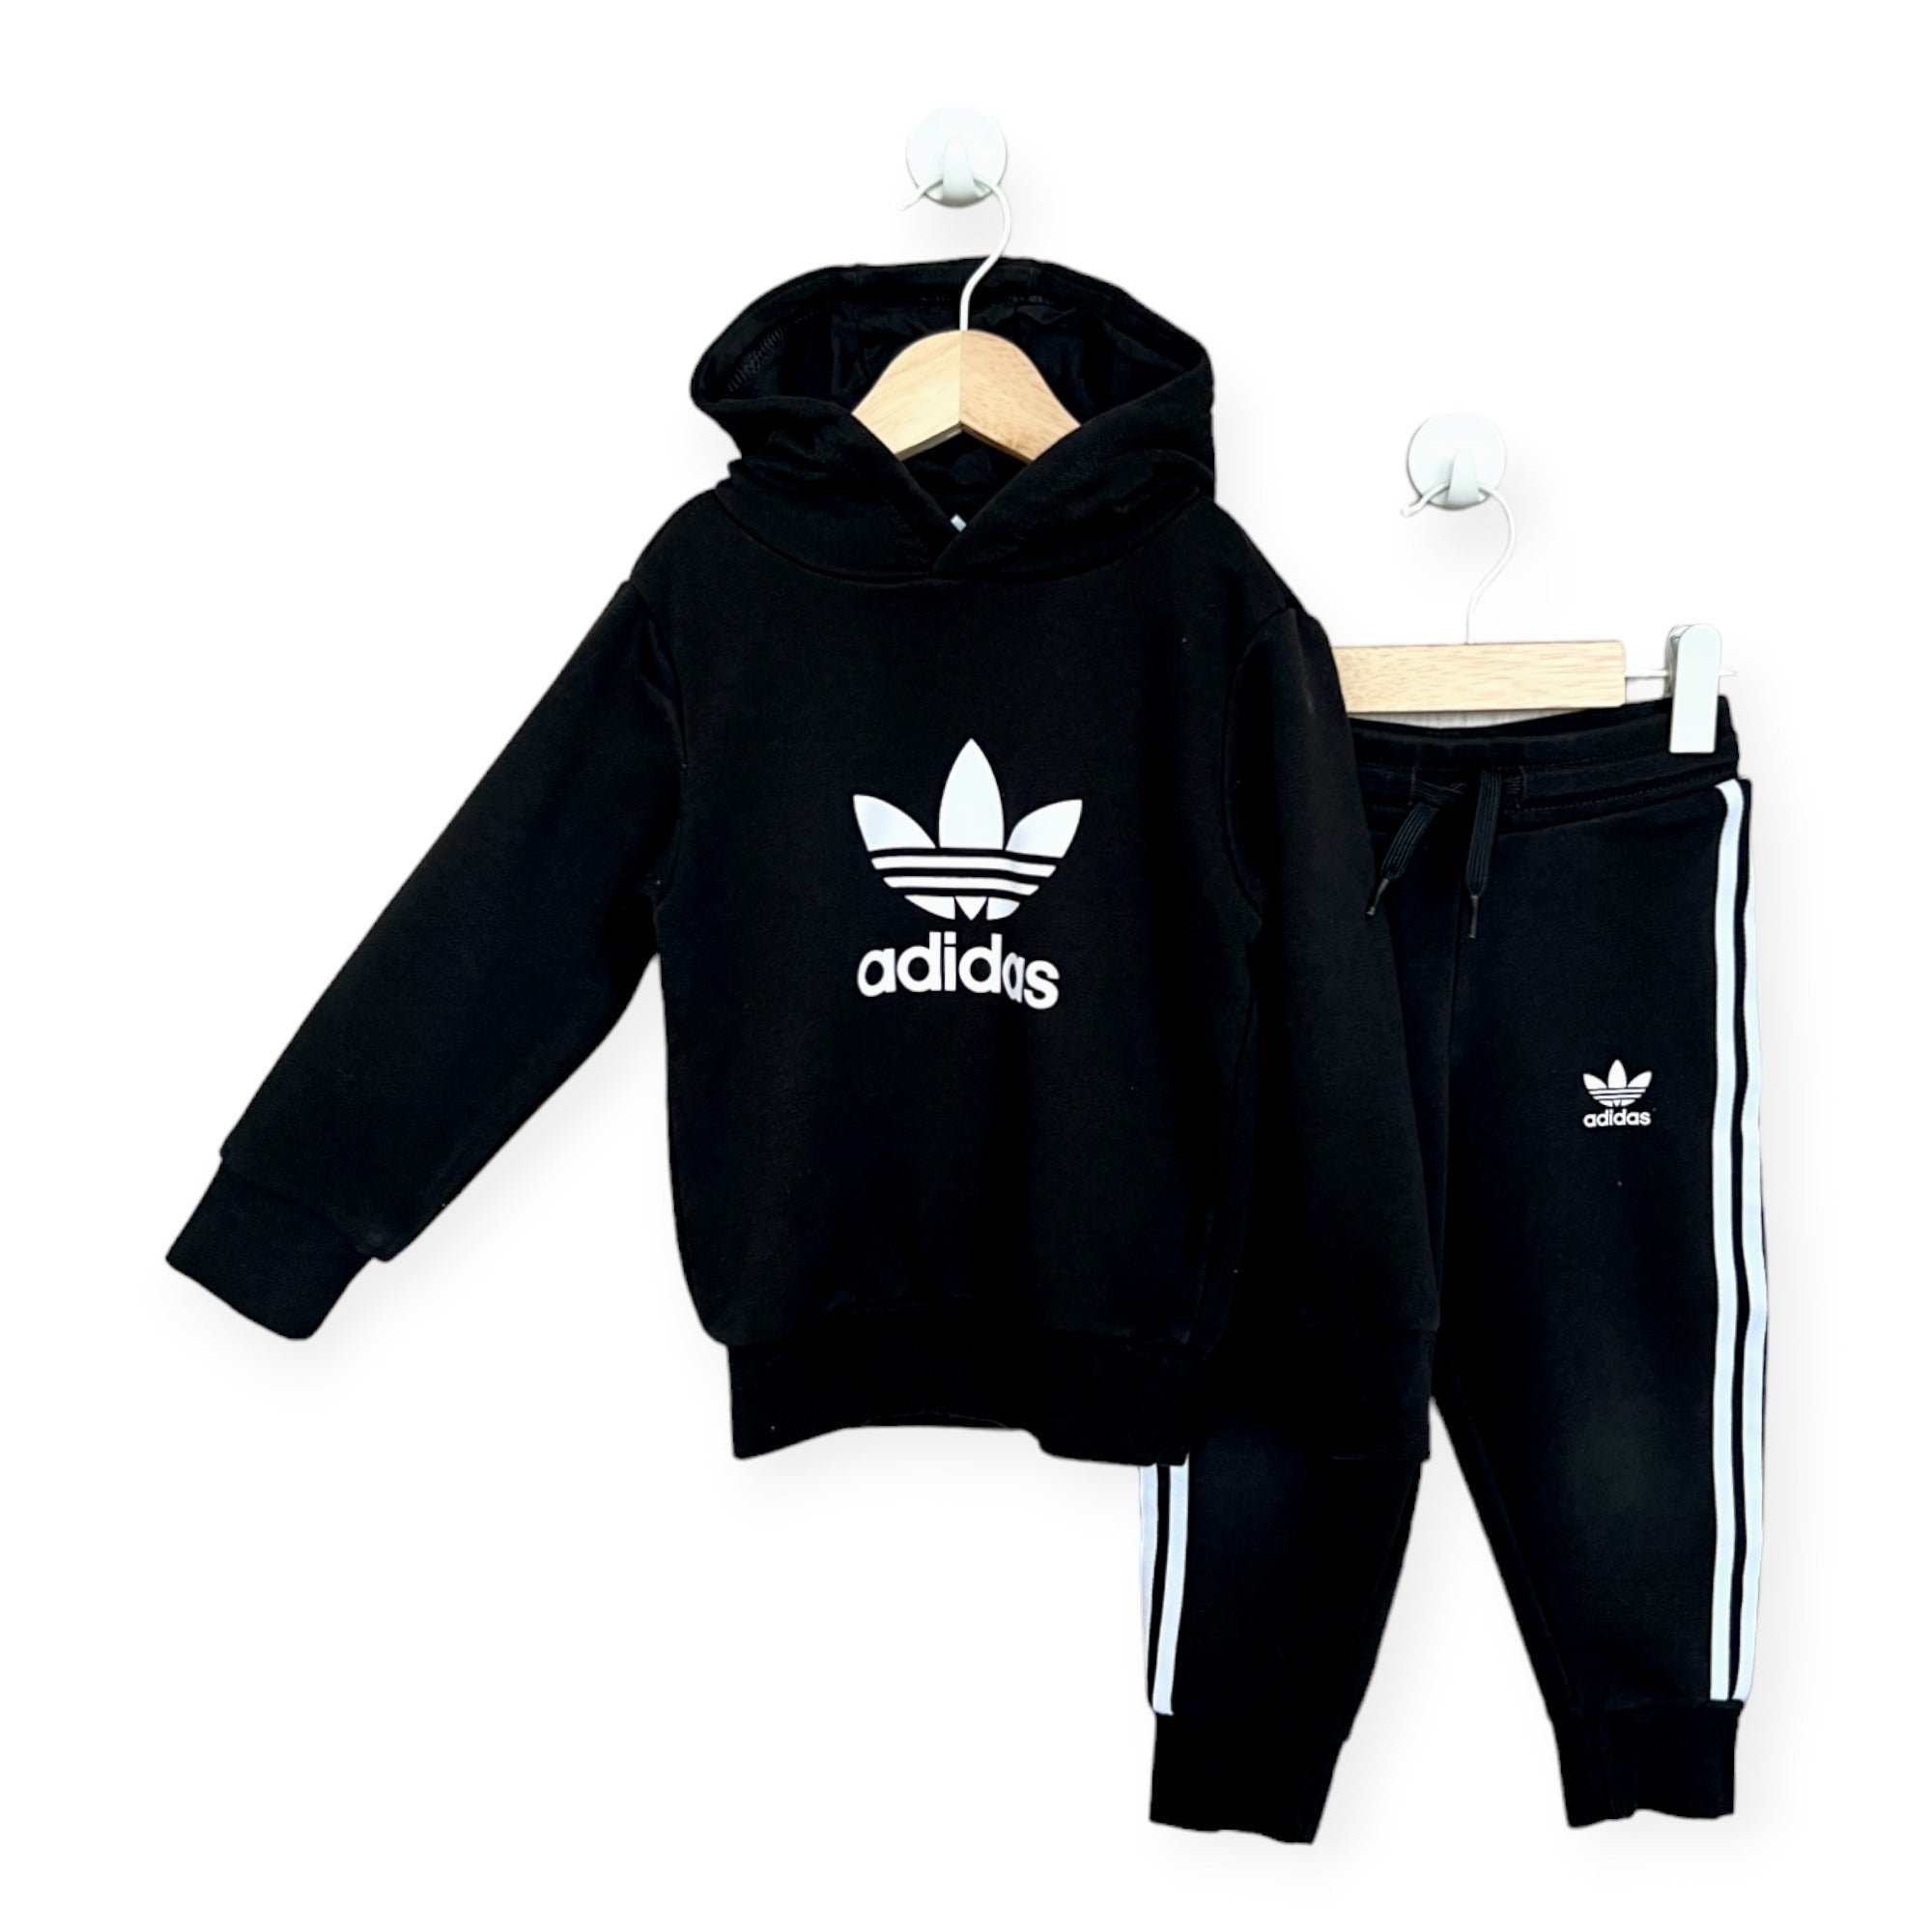 NEW Adidas Black Mix White Luxury Brand Hoodie And Pants Limited Edition